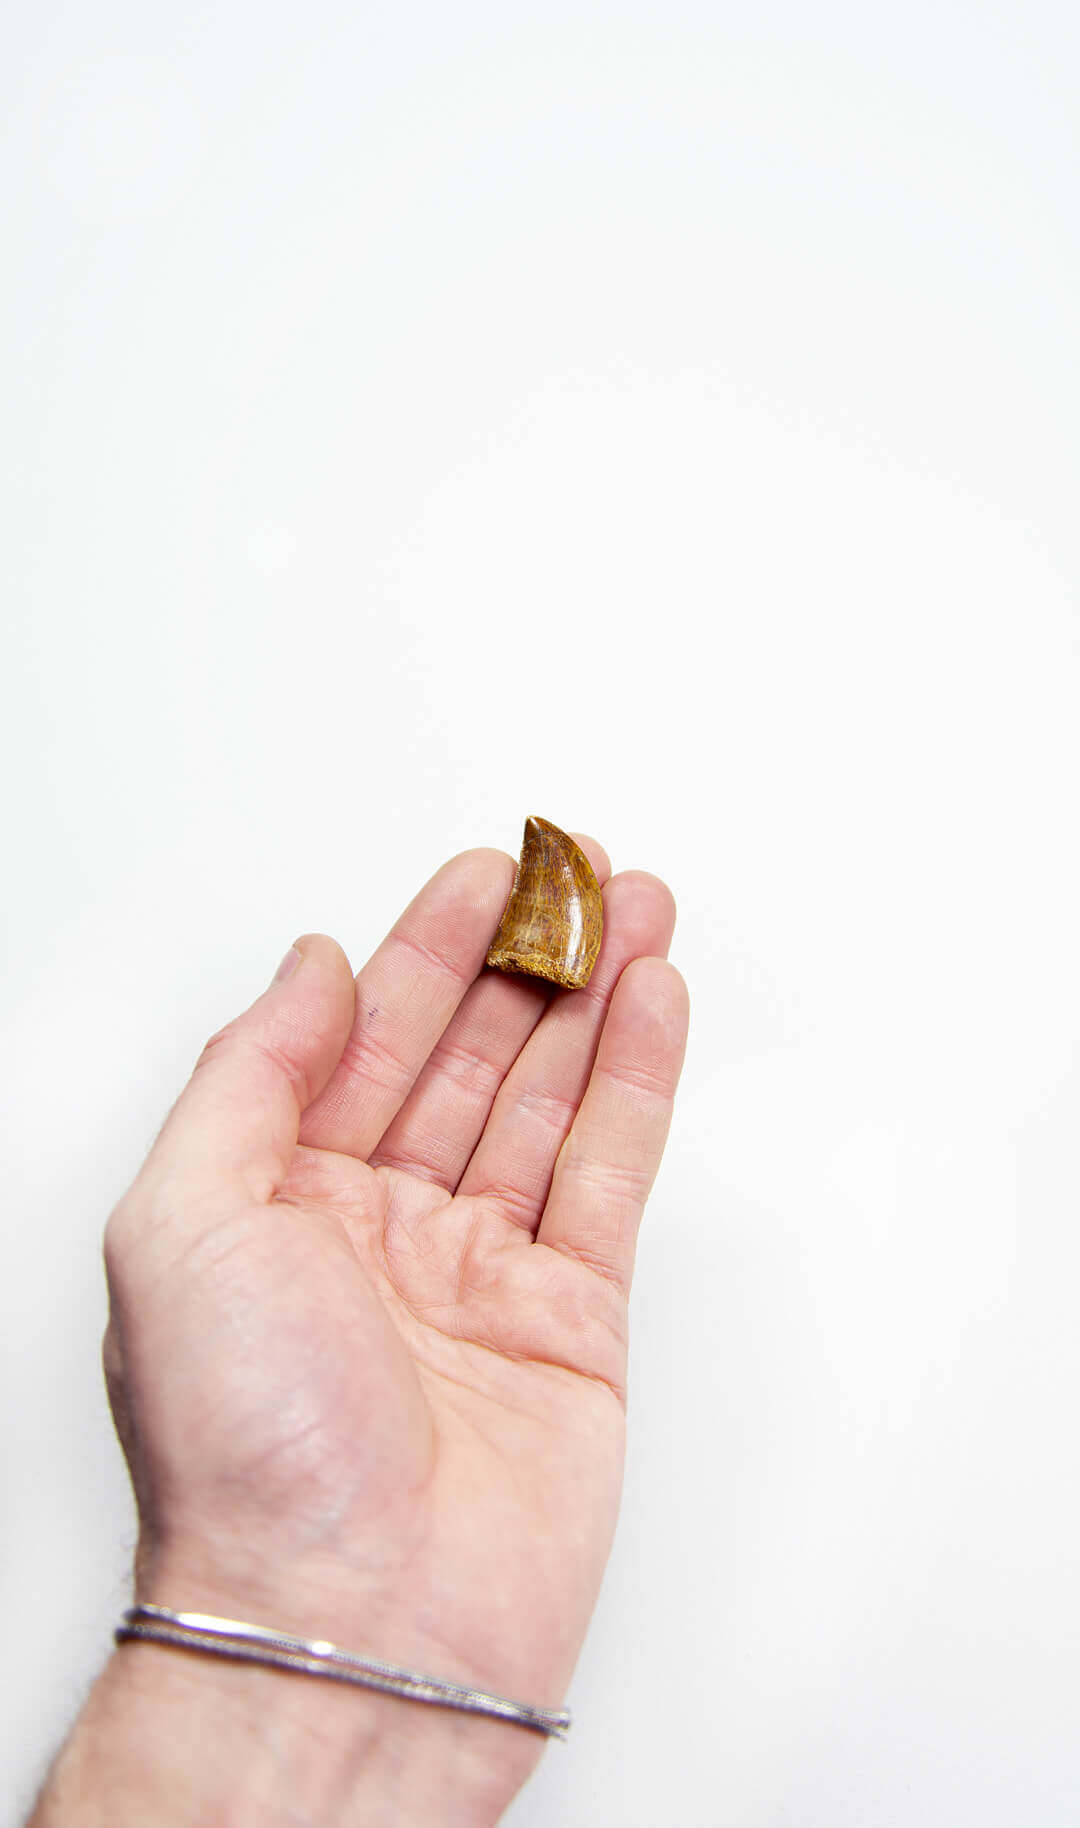 real fossil dinosaur carcharodontosaurus tooth for sale at the uk fossil store 23